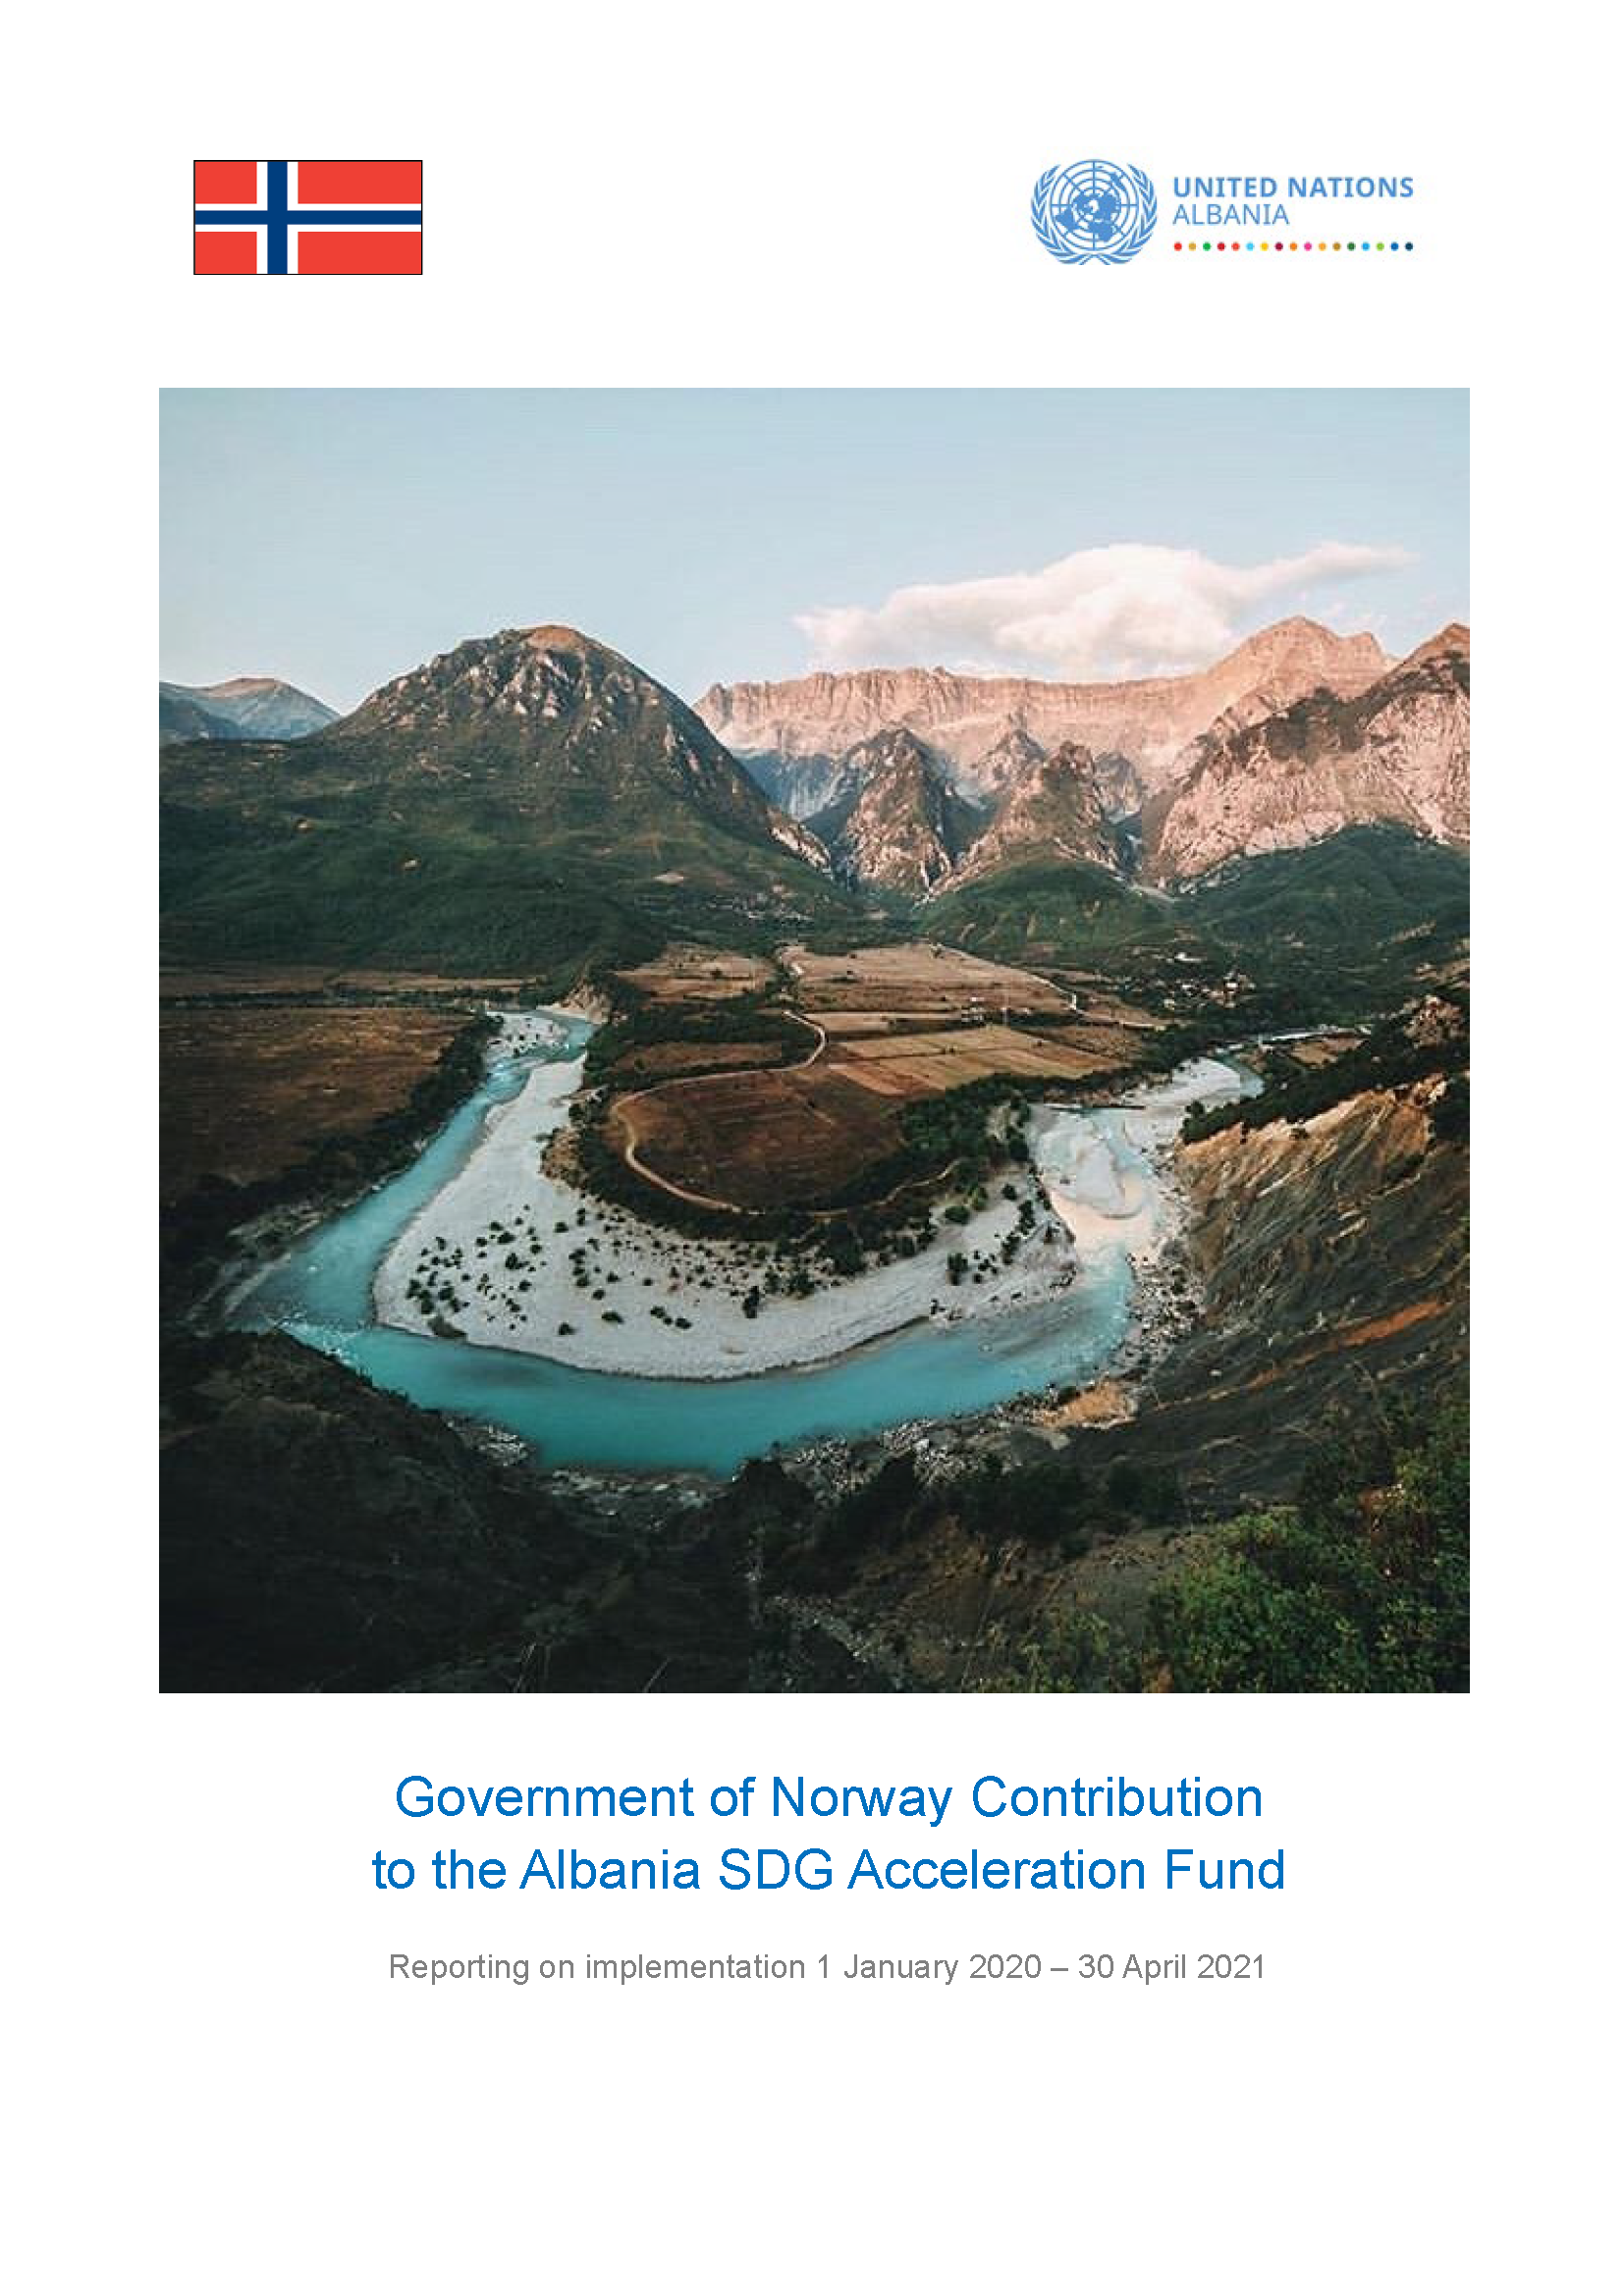 Norway's contribution to accelerating SDG implementation in Albania - 2021